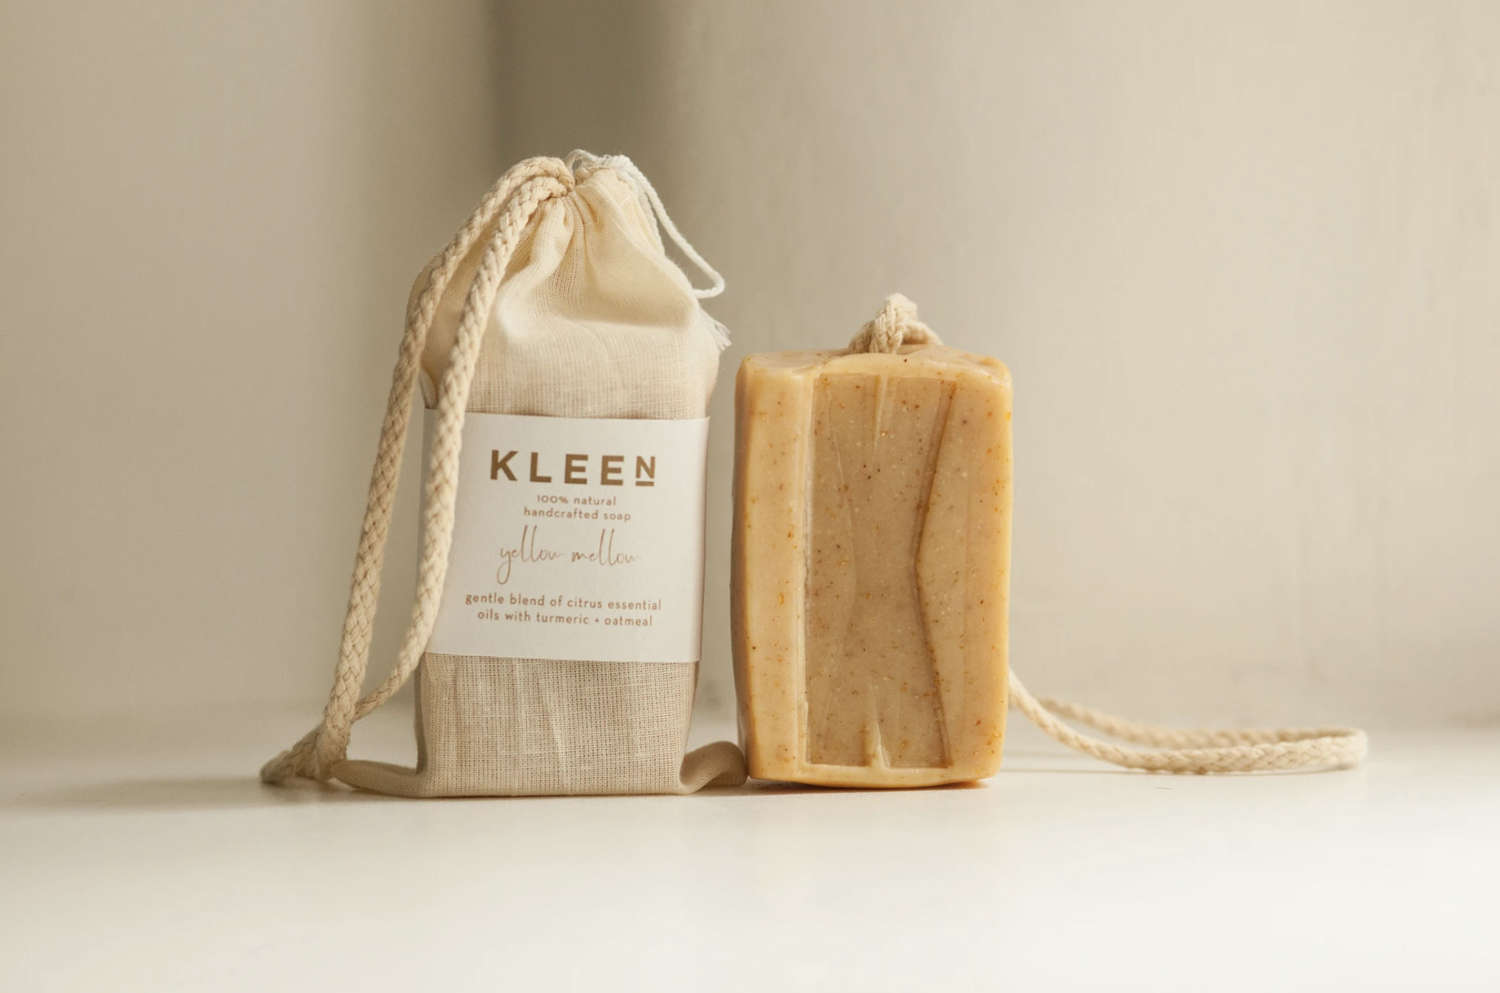 Yellow Mellow - Kleen 100% Natural handcrafted soap on a rope - 160g